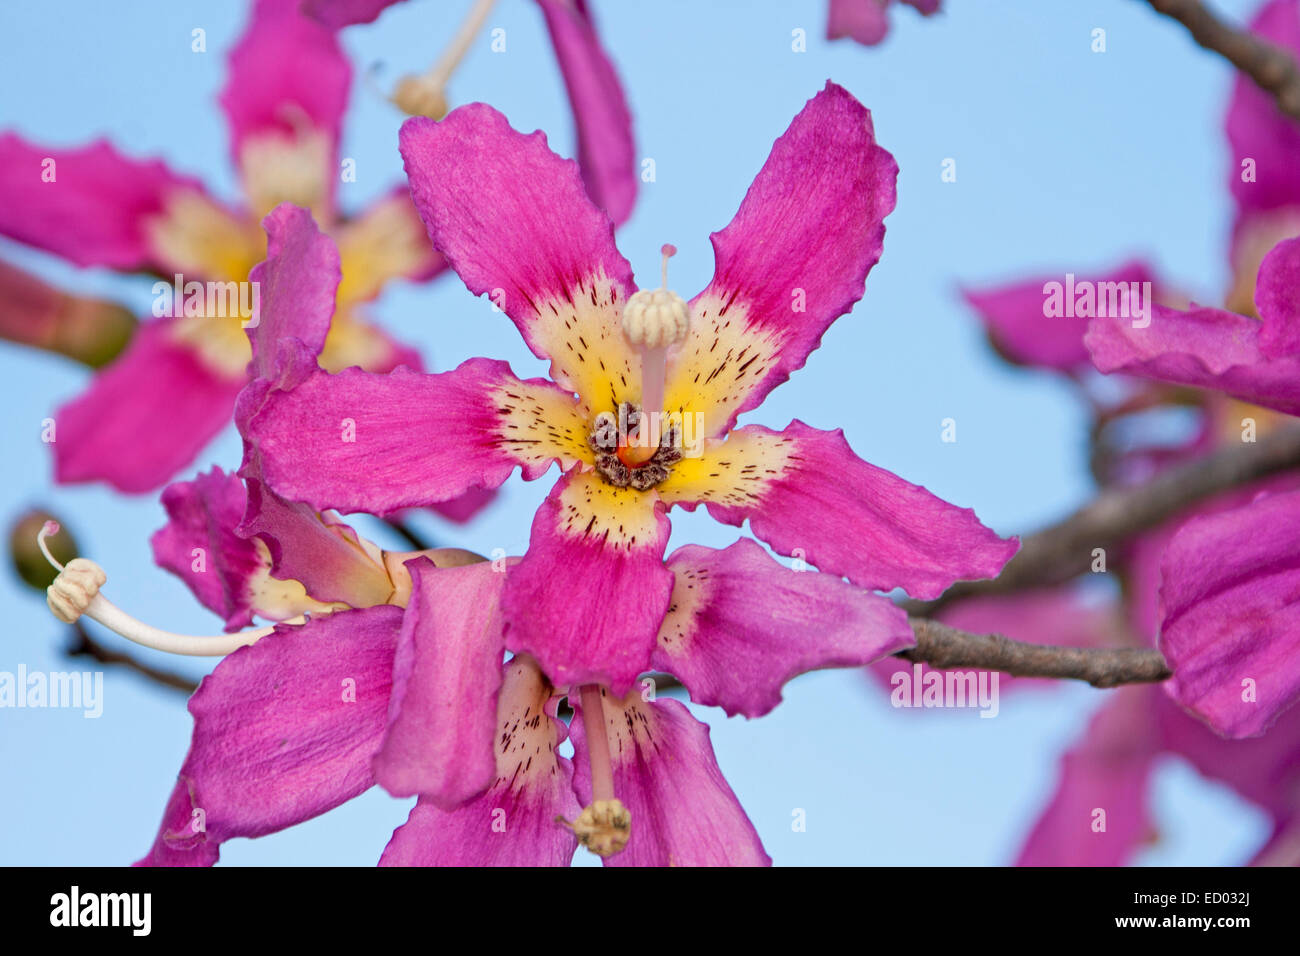 Cluster of bright pink flowers with white & yellow centres of Ceiba speciosa syn. Chorisia speciosa, with background of blue sky Stock Photo